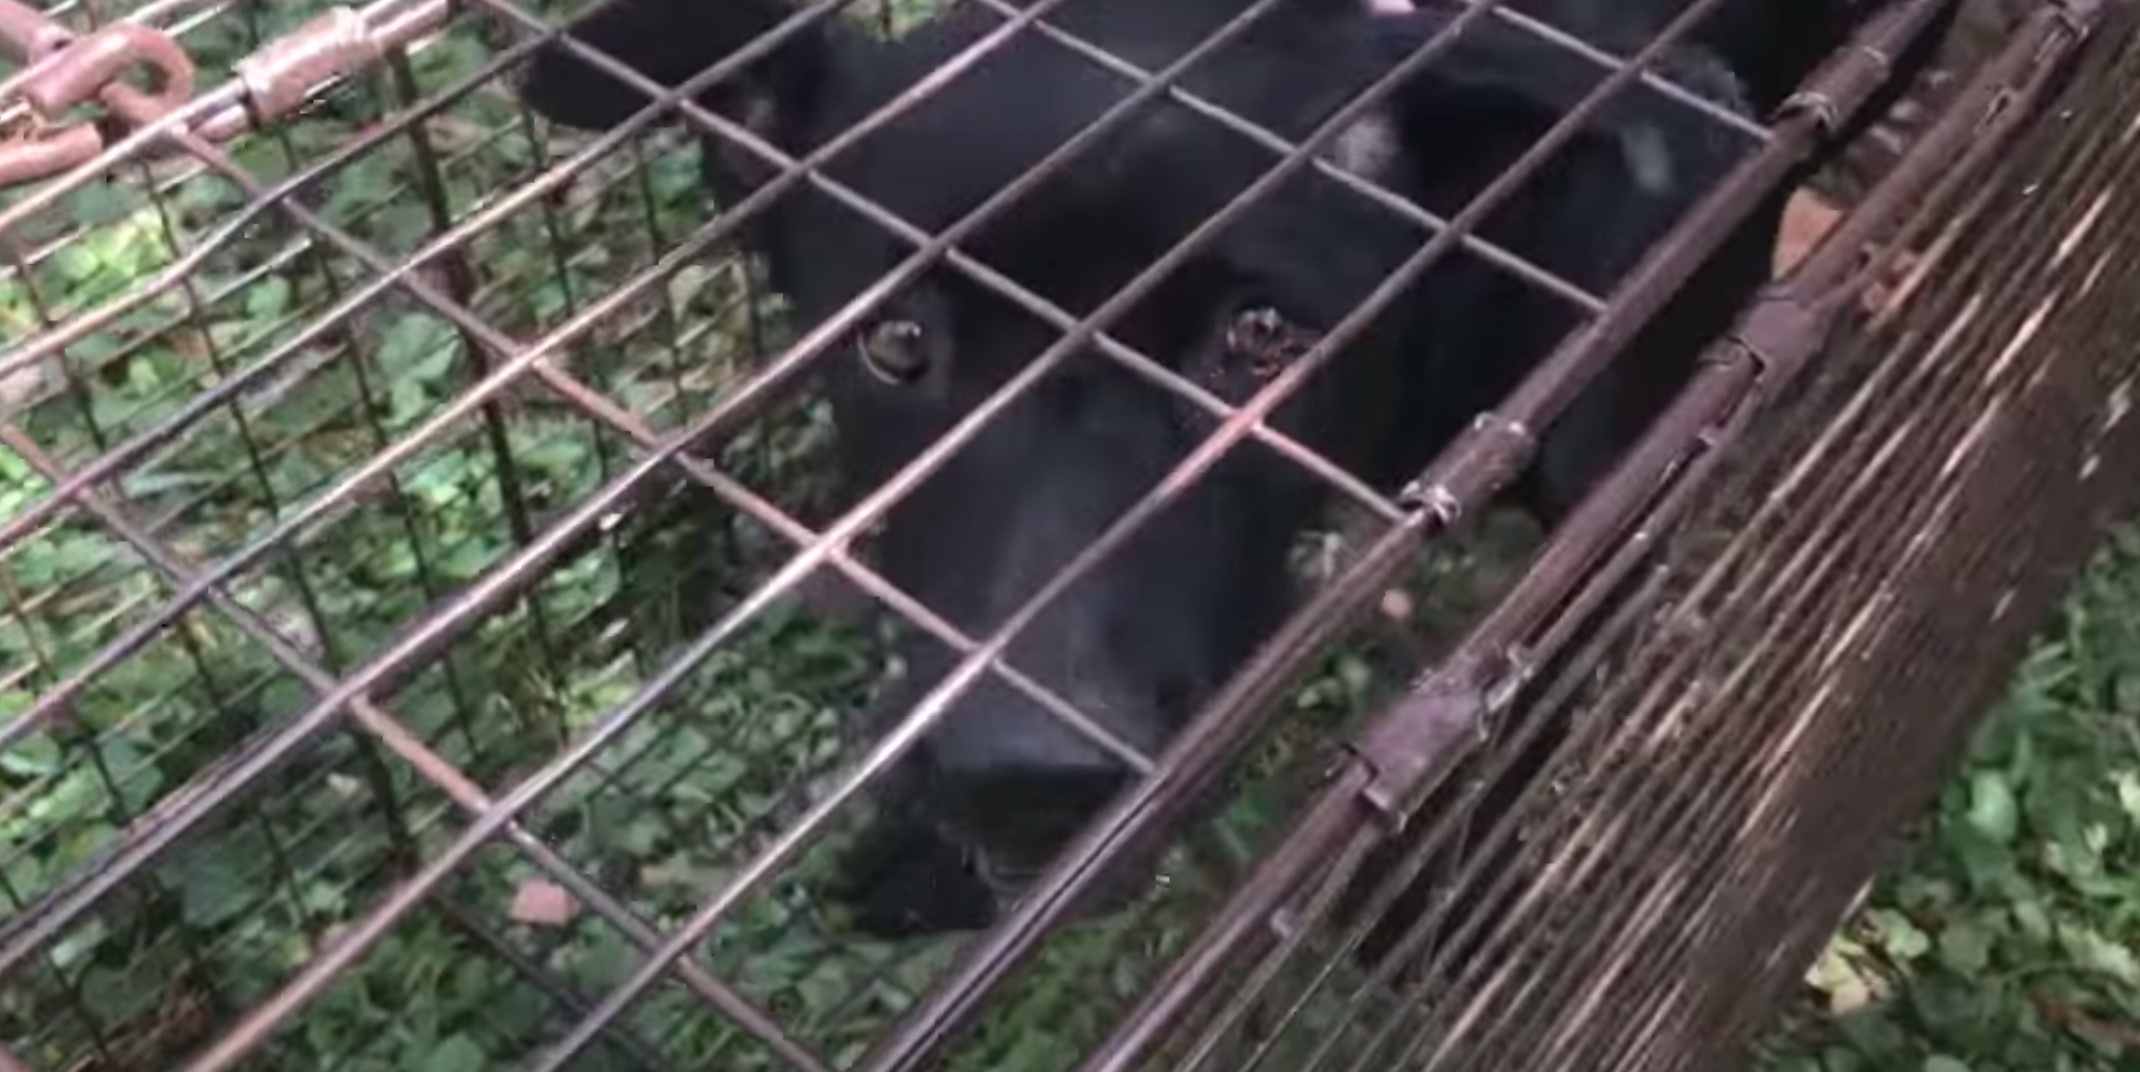 the sad look of a black dog in a cage